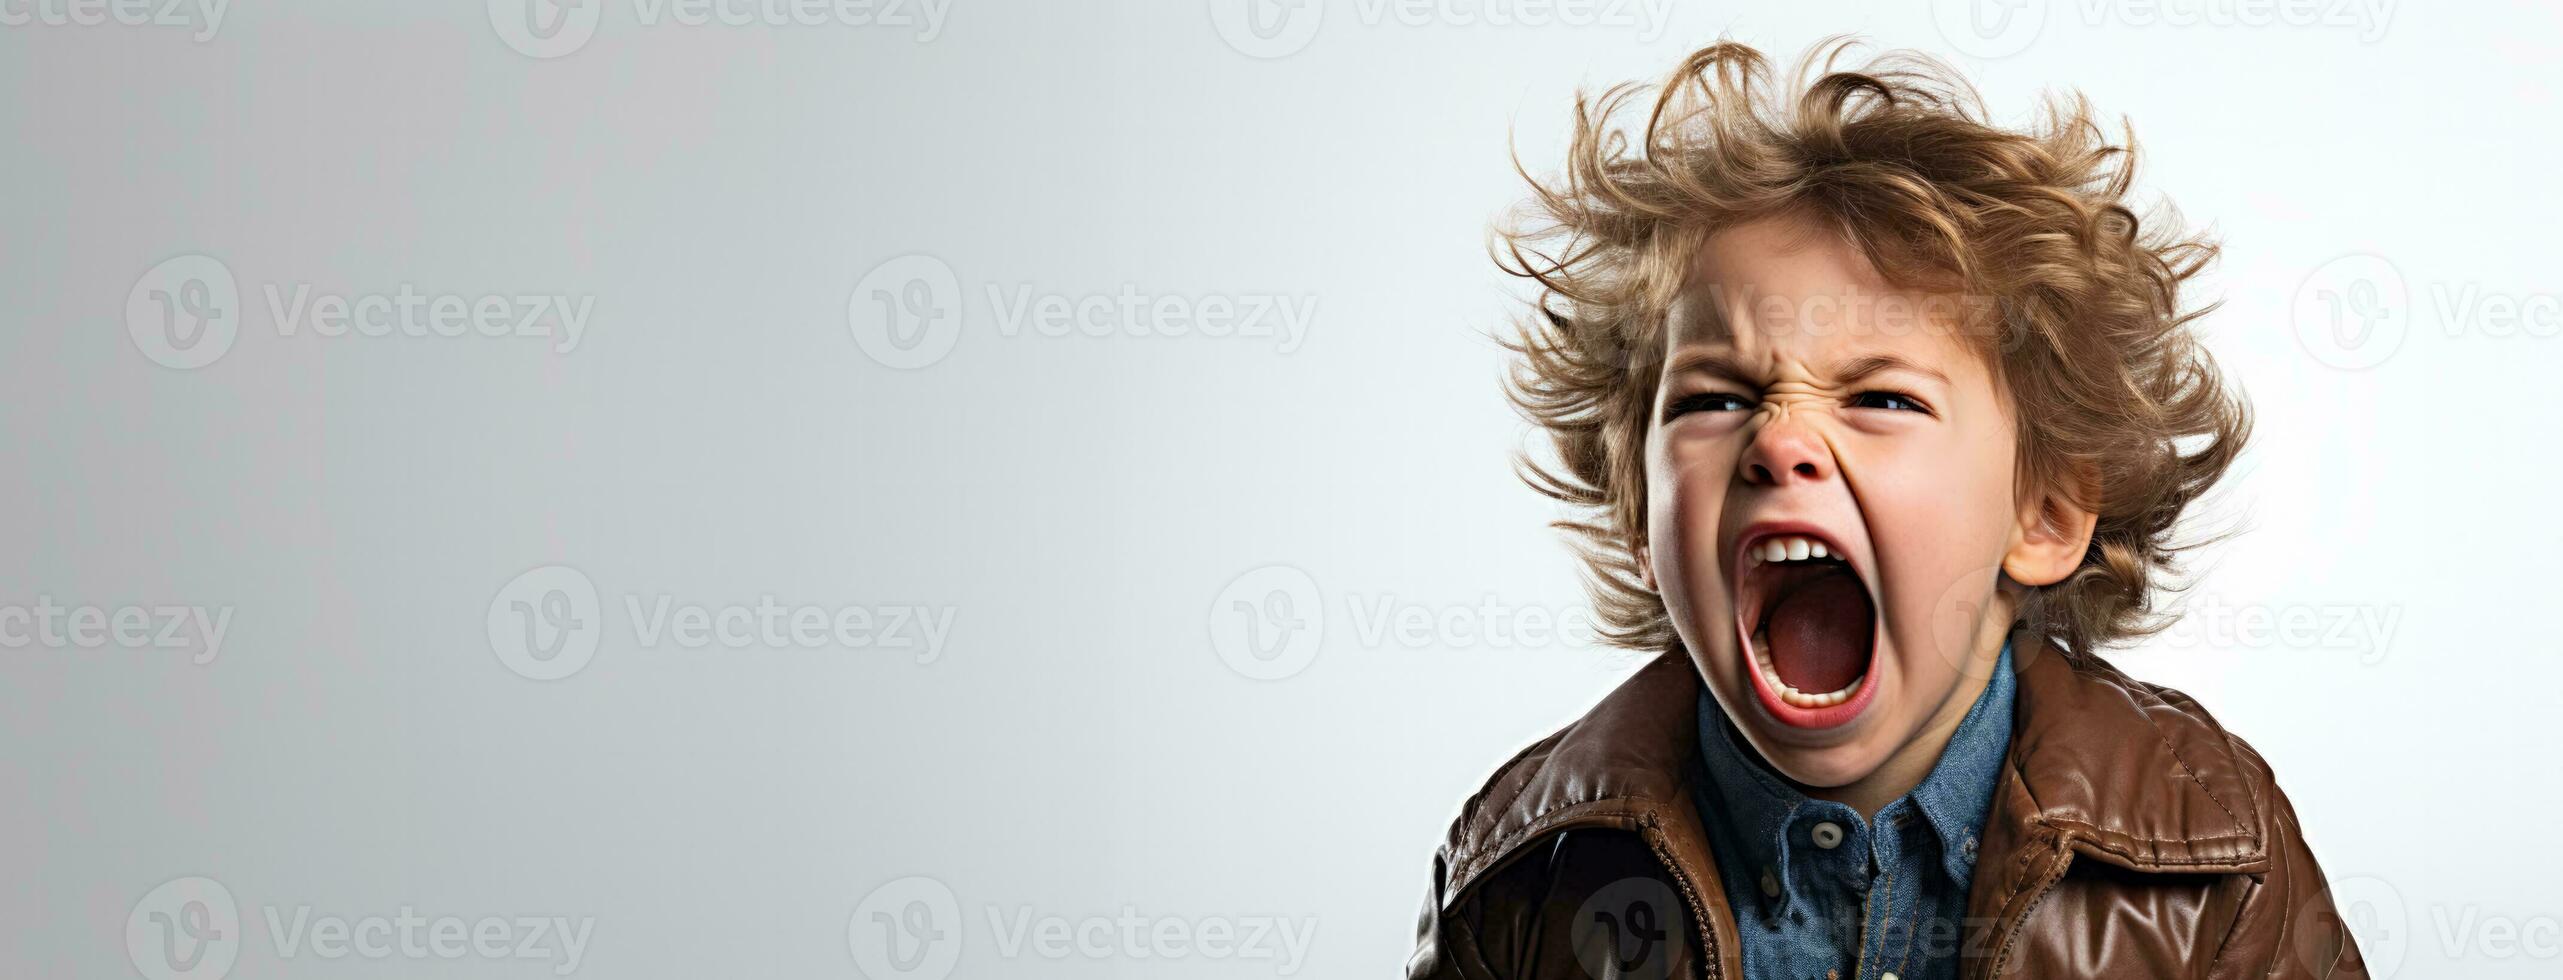 A single child screaming in frustration isolated on a white background photo